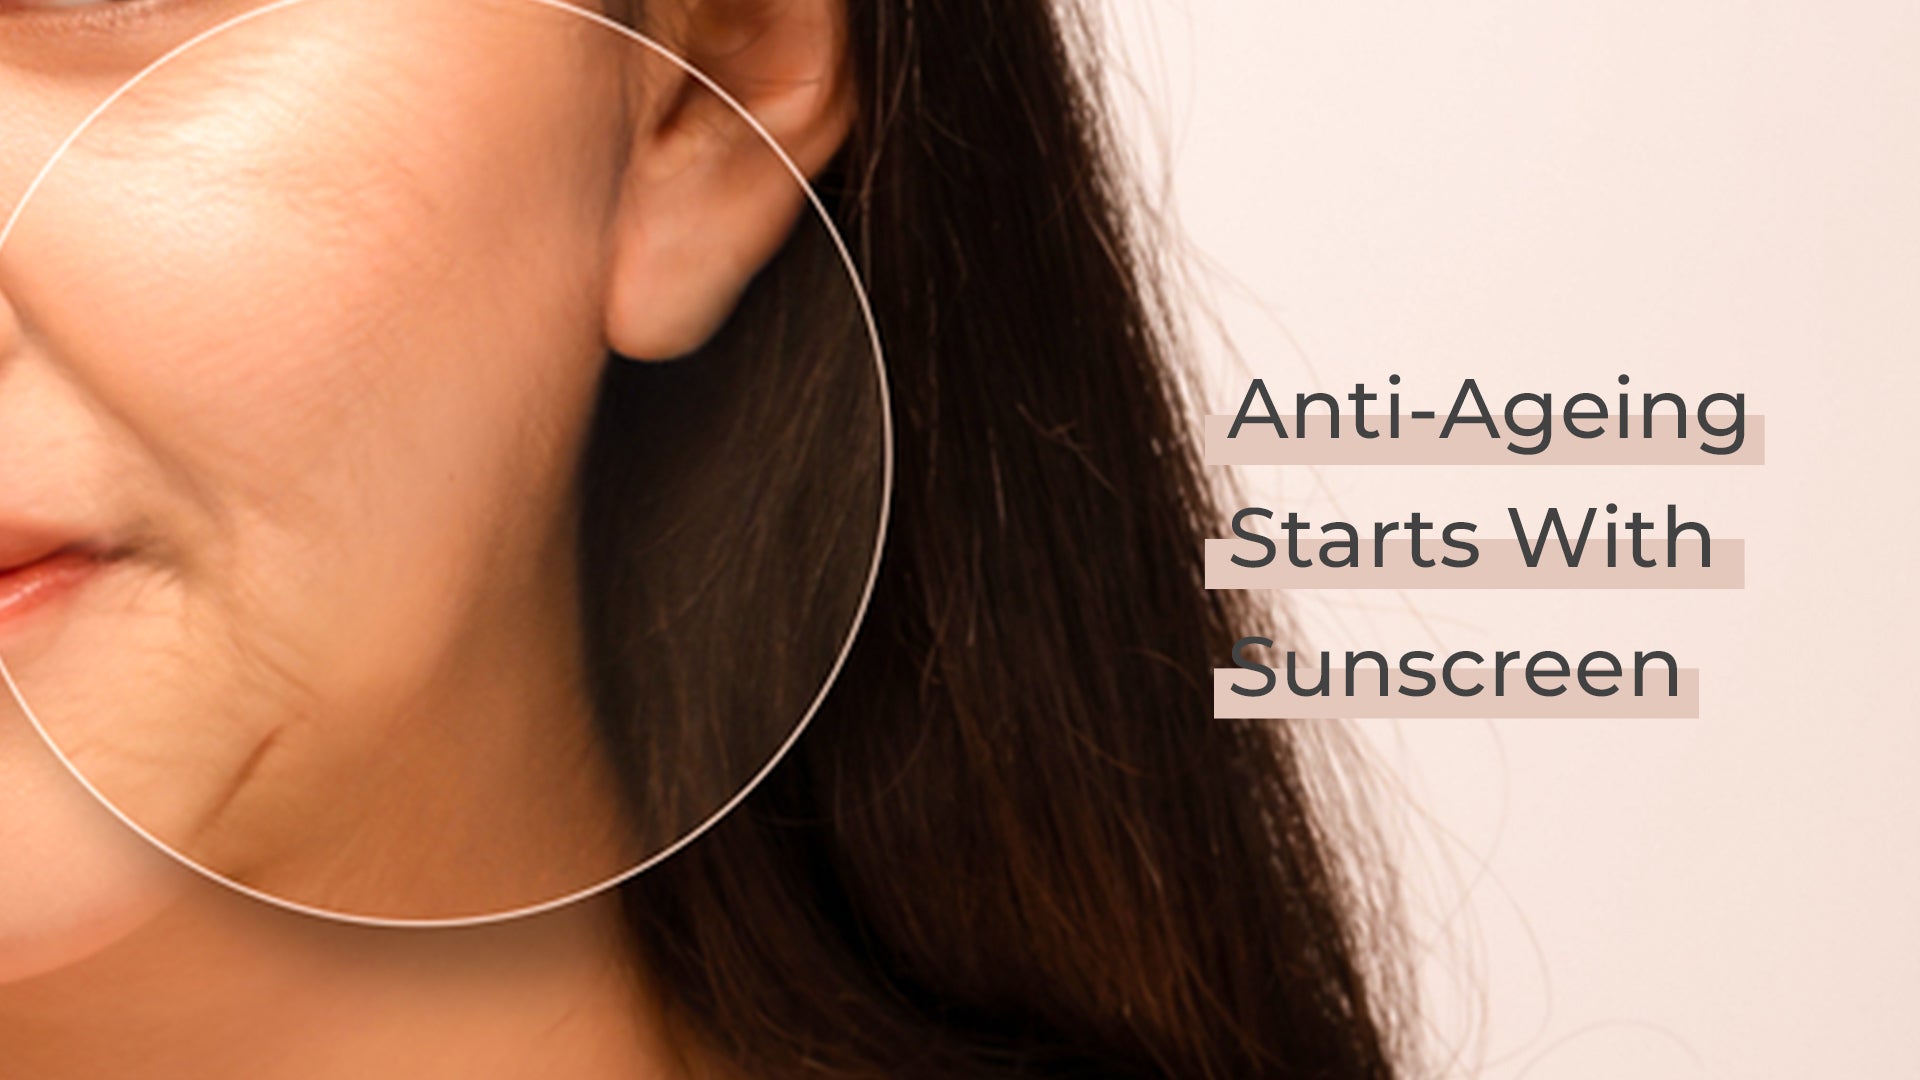 Anti-Ageing Starts With Sunscreen